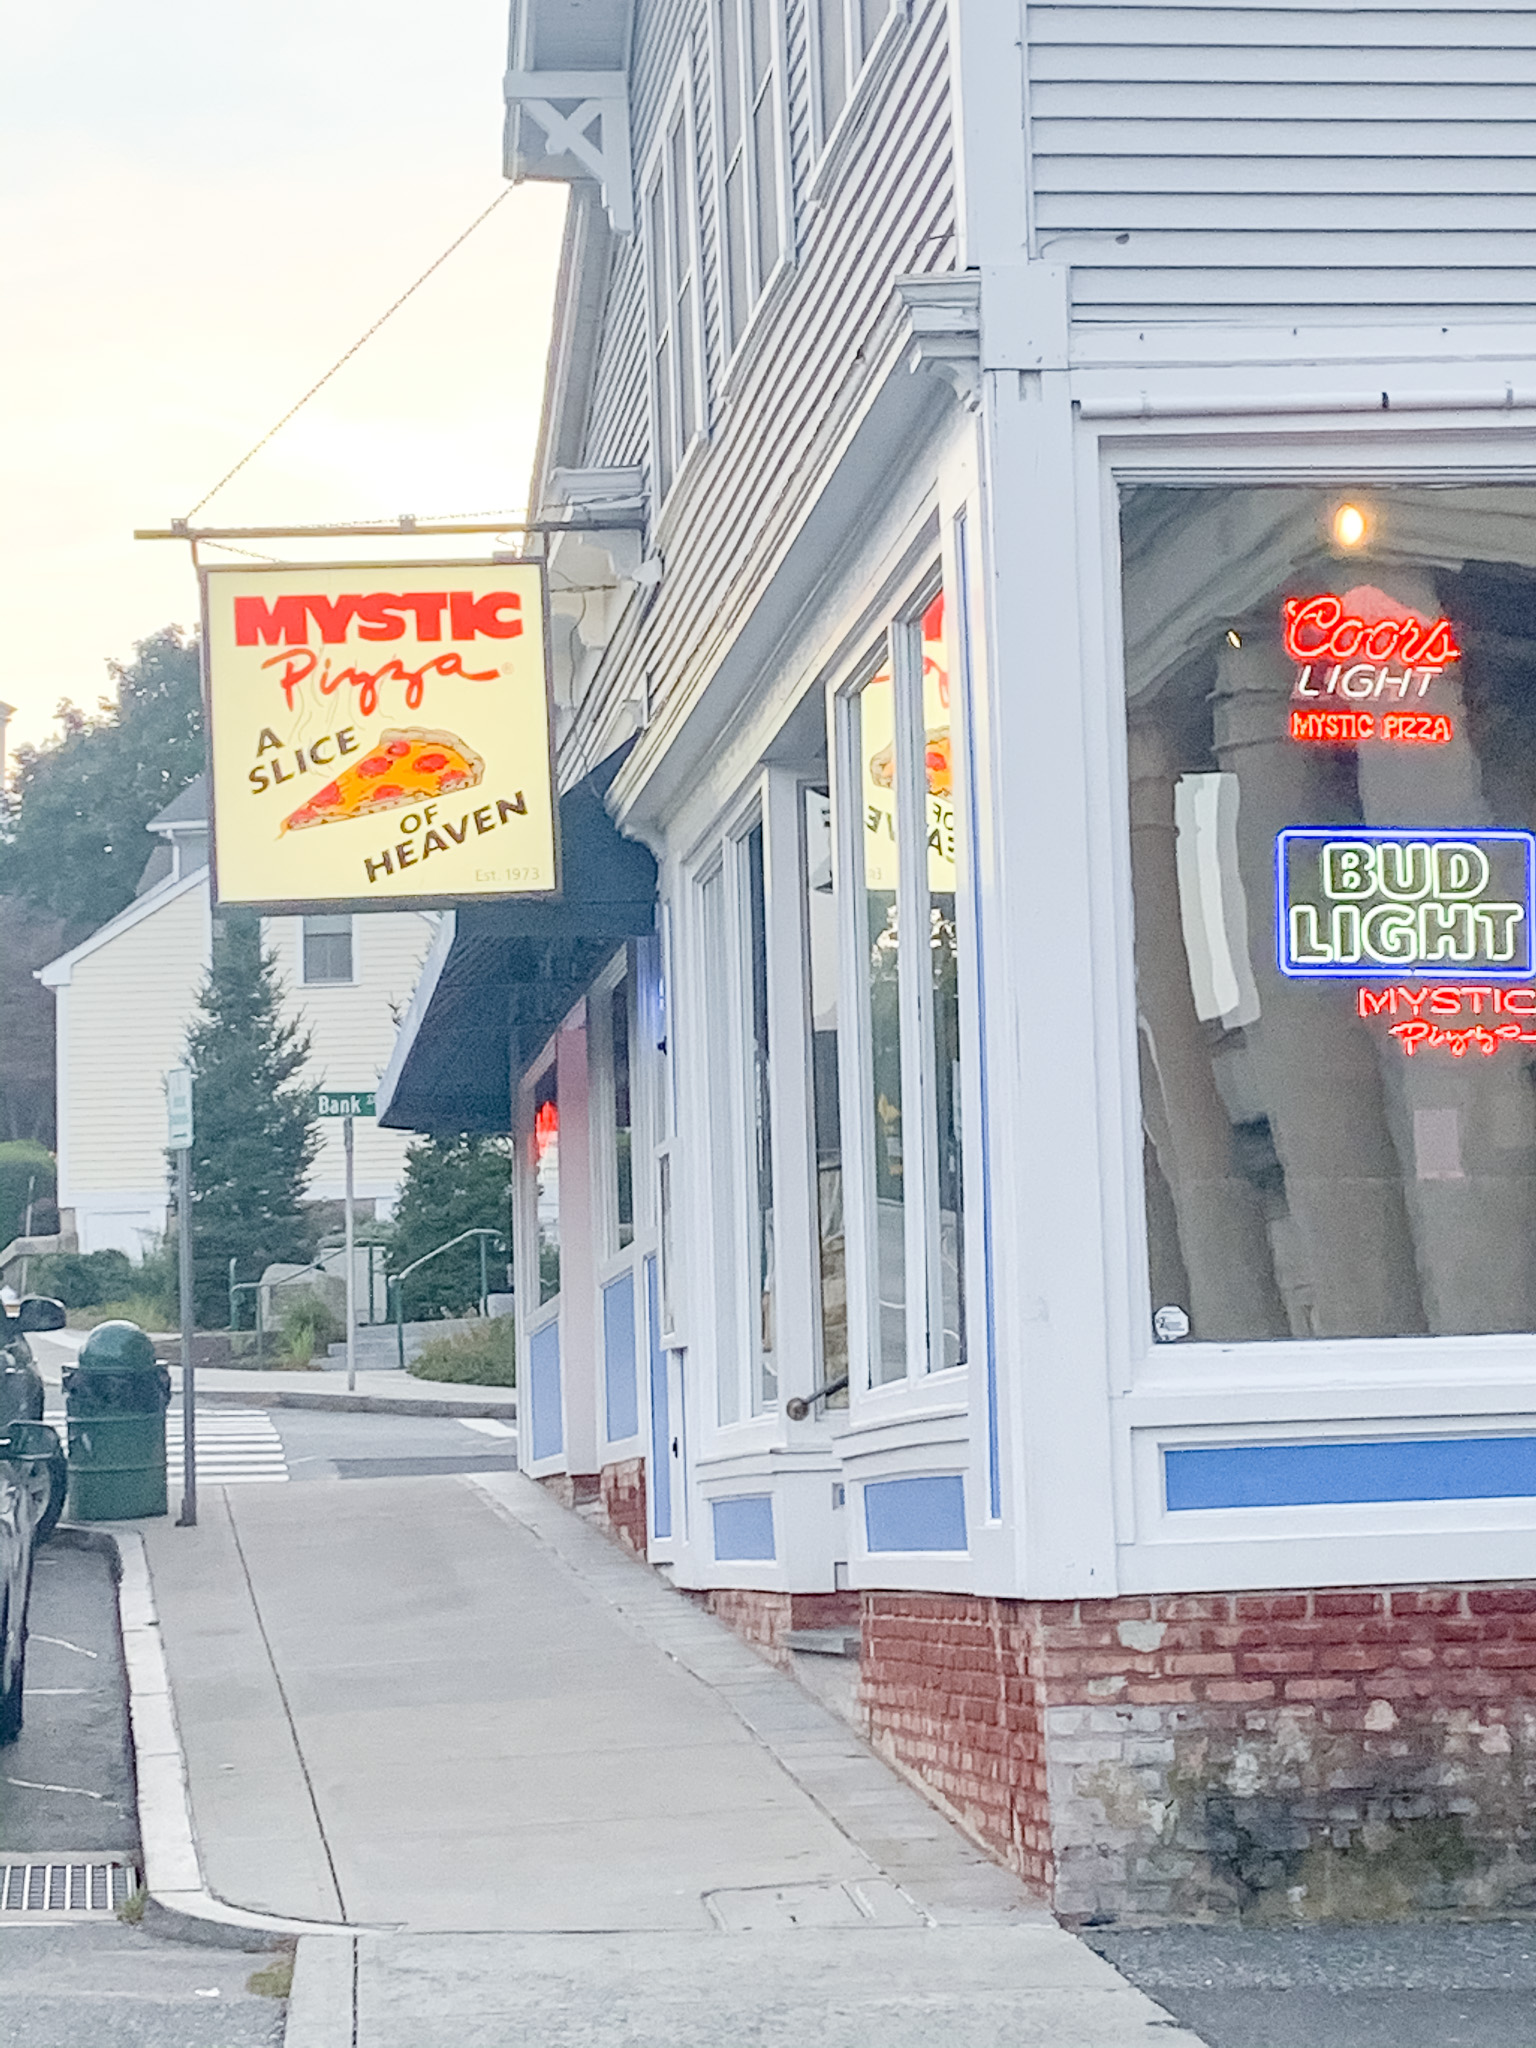 mystic pizza is one of the best restaurants in mystic ct